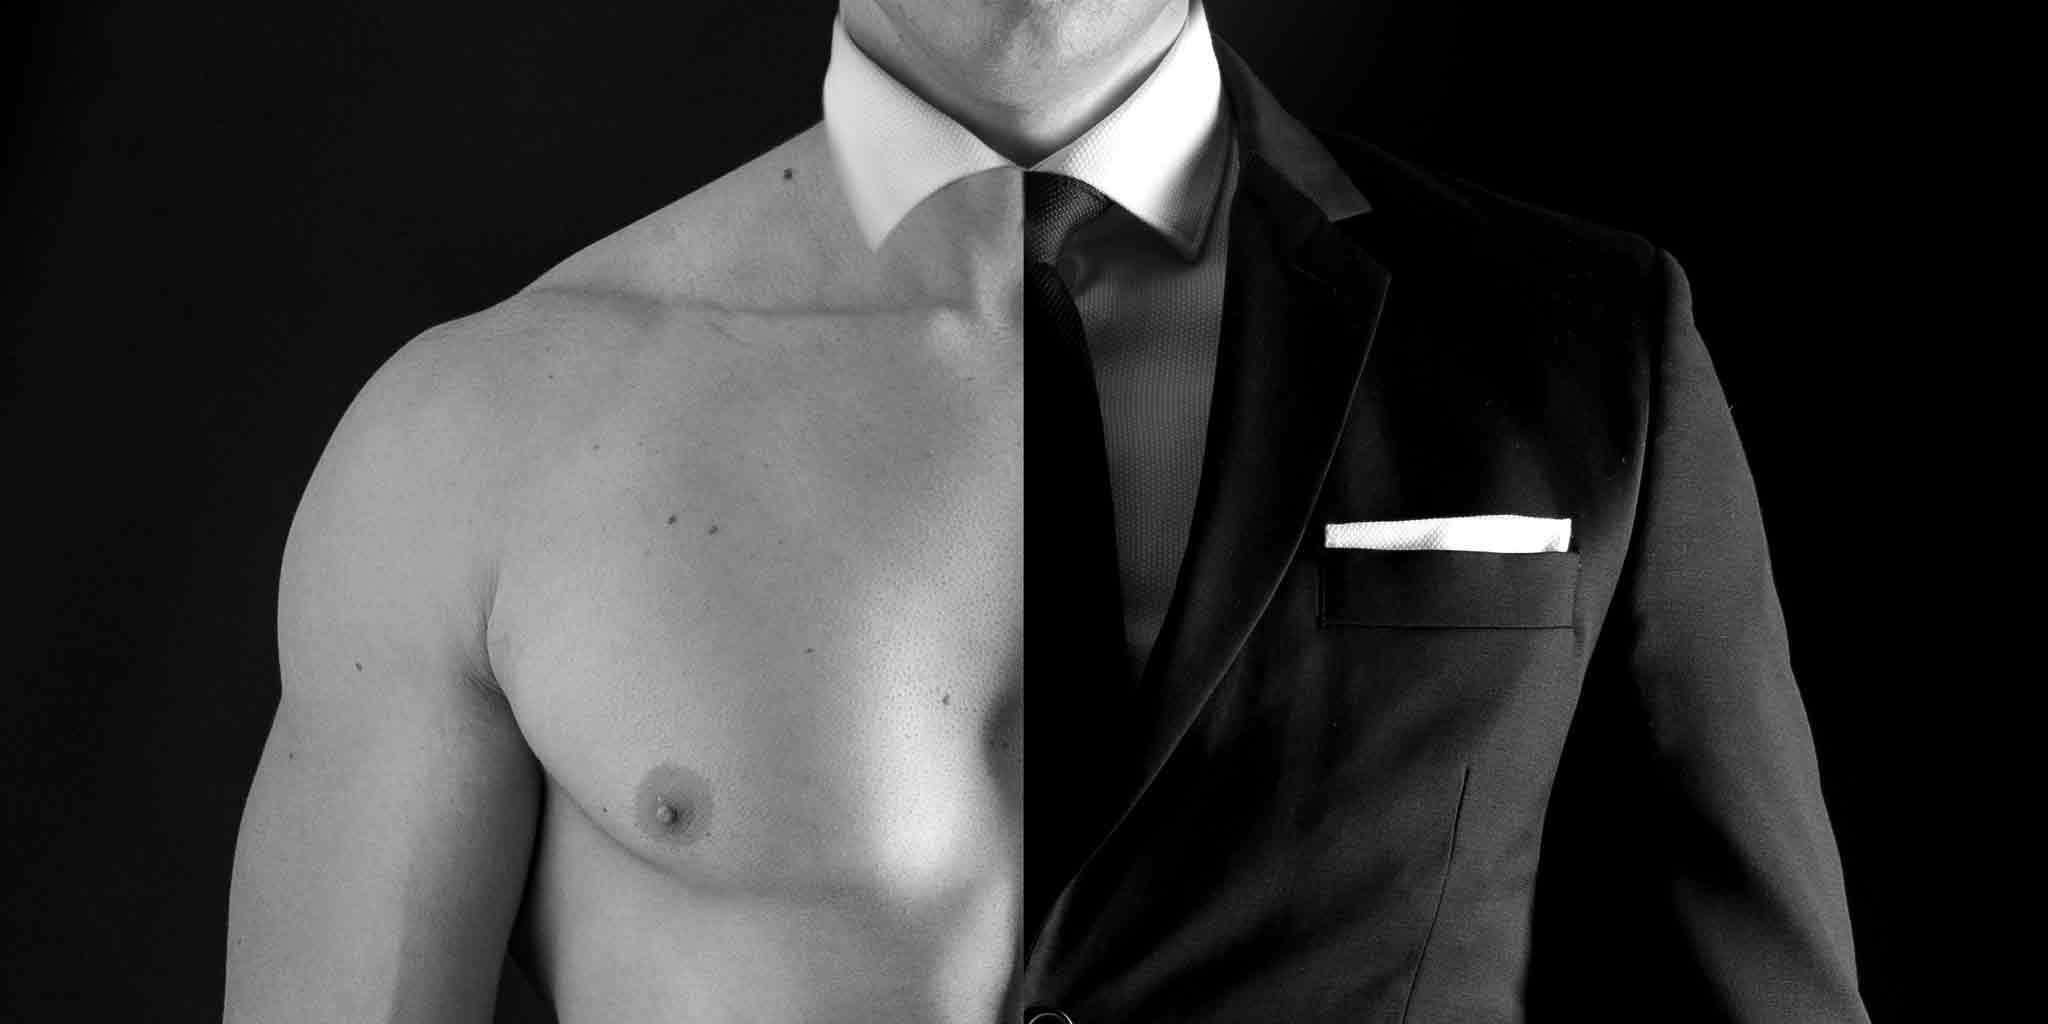 Monochrome image capturing the juxtaposition of a bare masculine torso and a formal suit, symbolizing Core Benefits Toowoomba's commitment to men's massage and wellness.